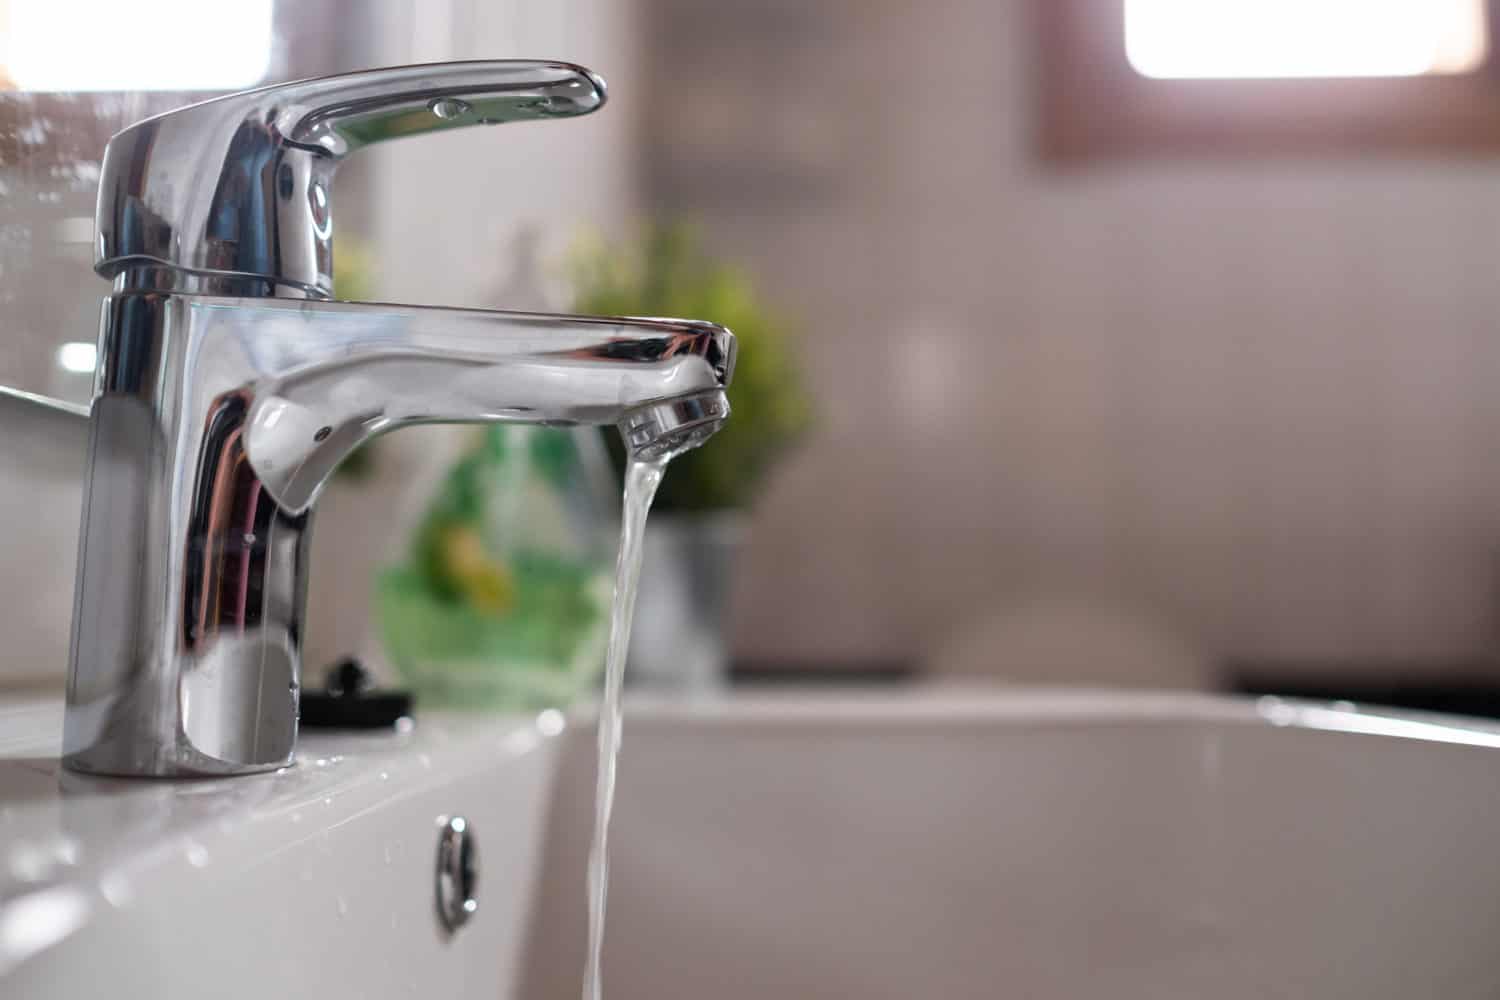 What Causes Low Water Pressure in the Whole House